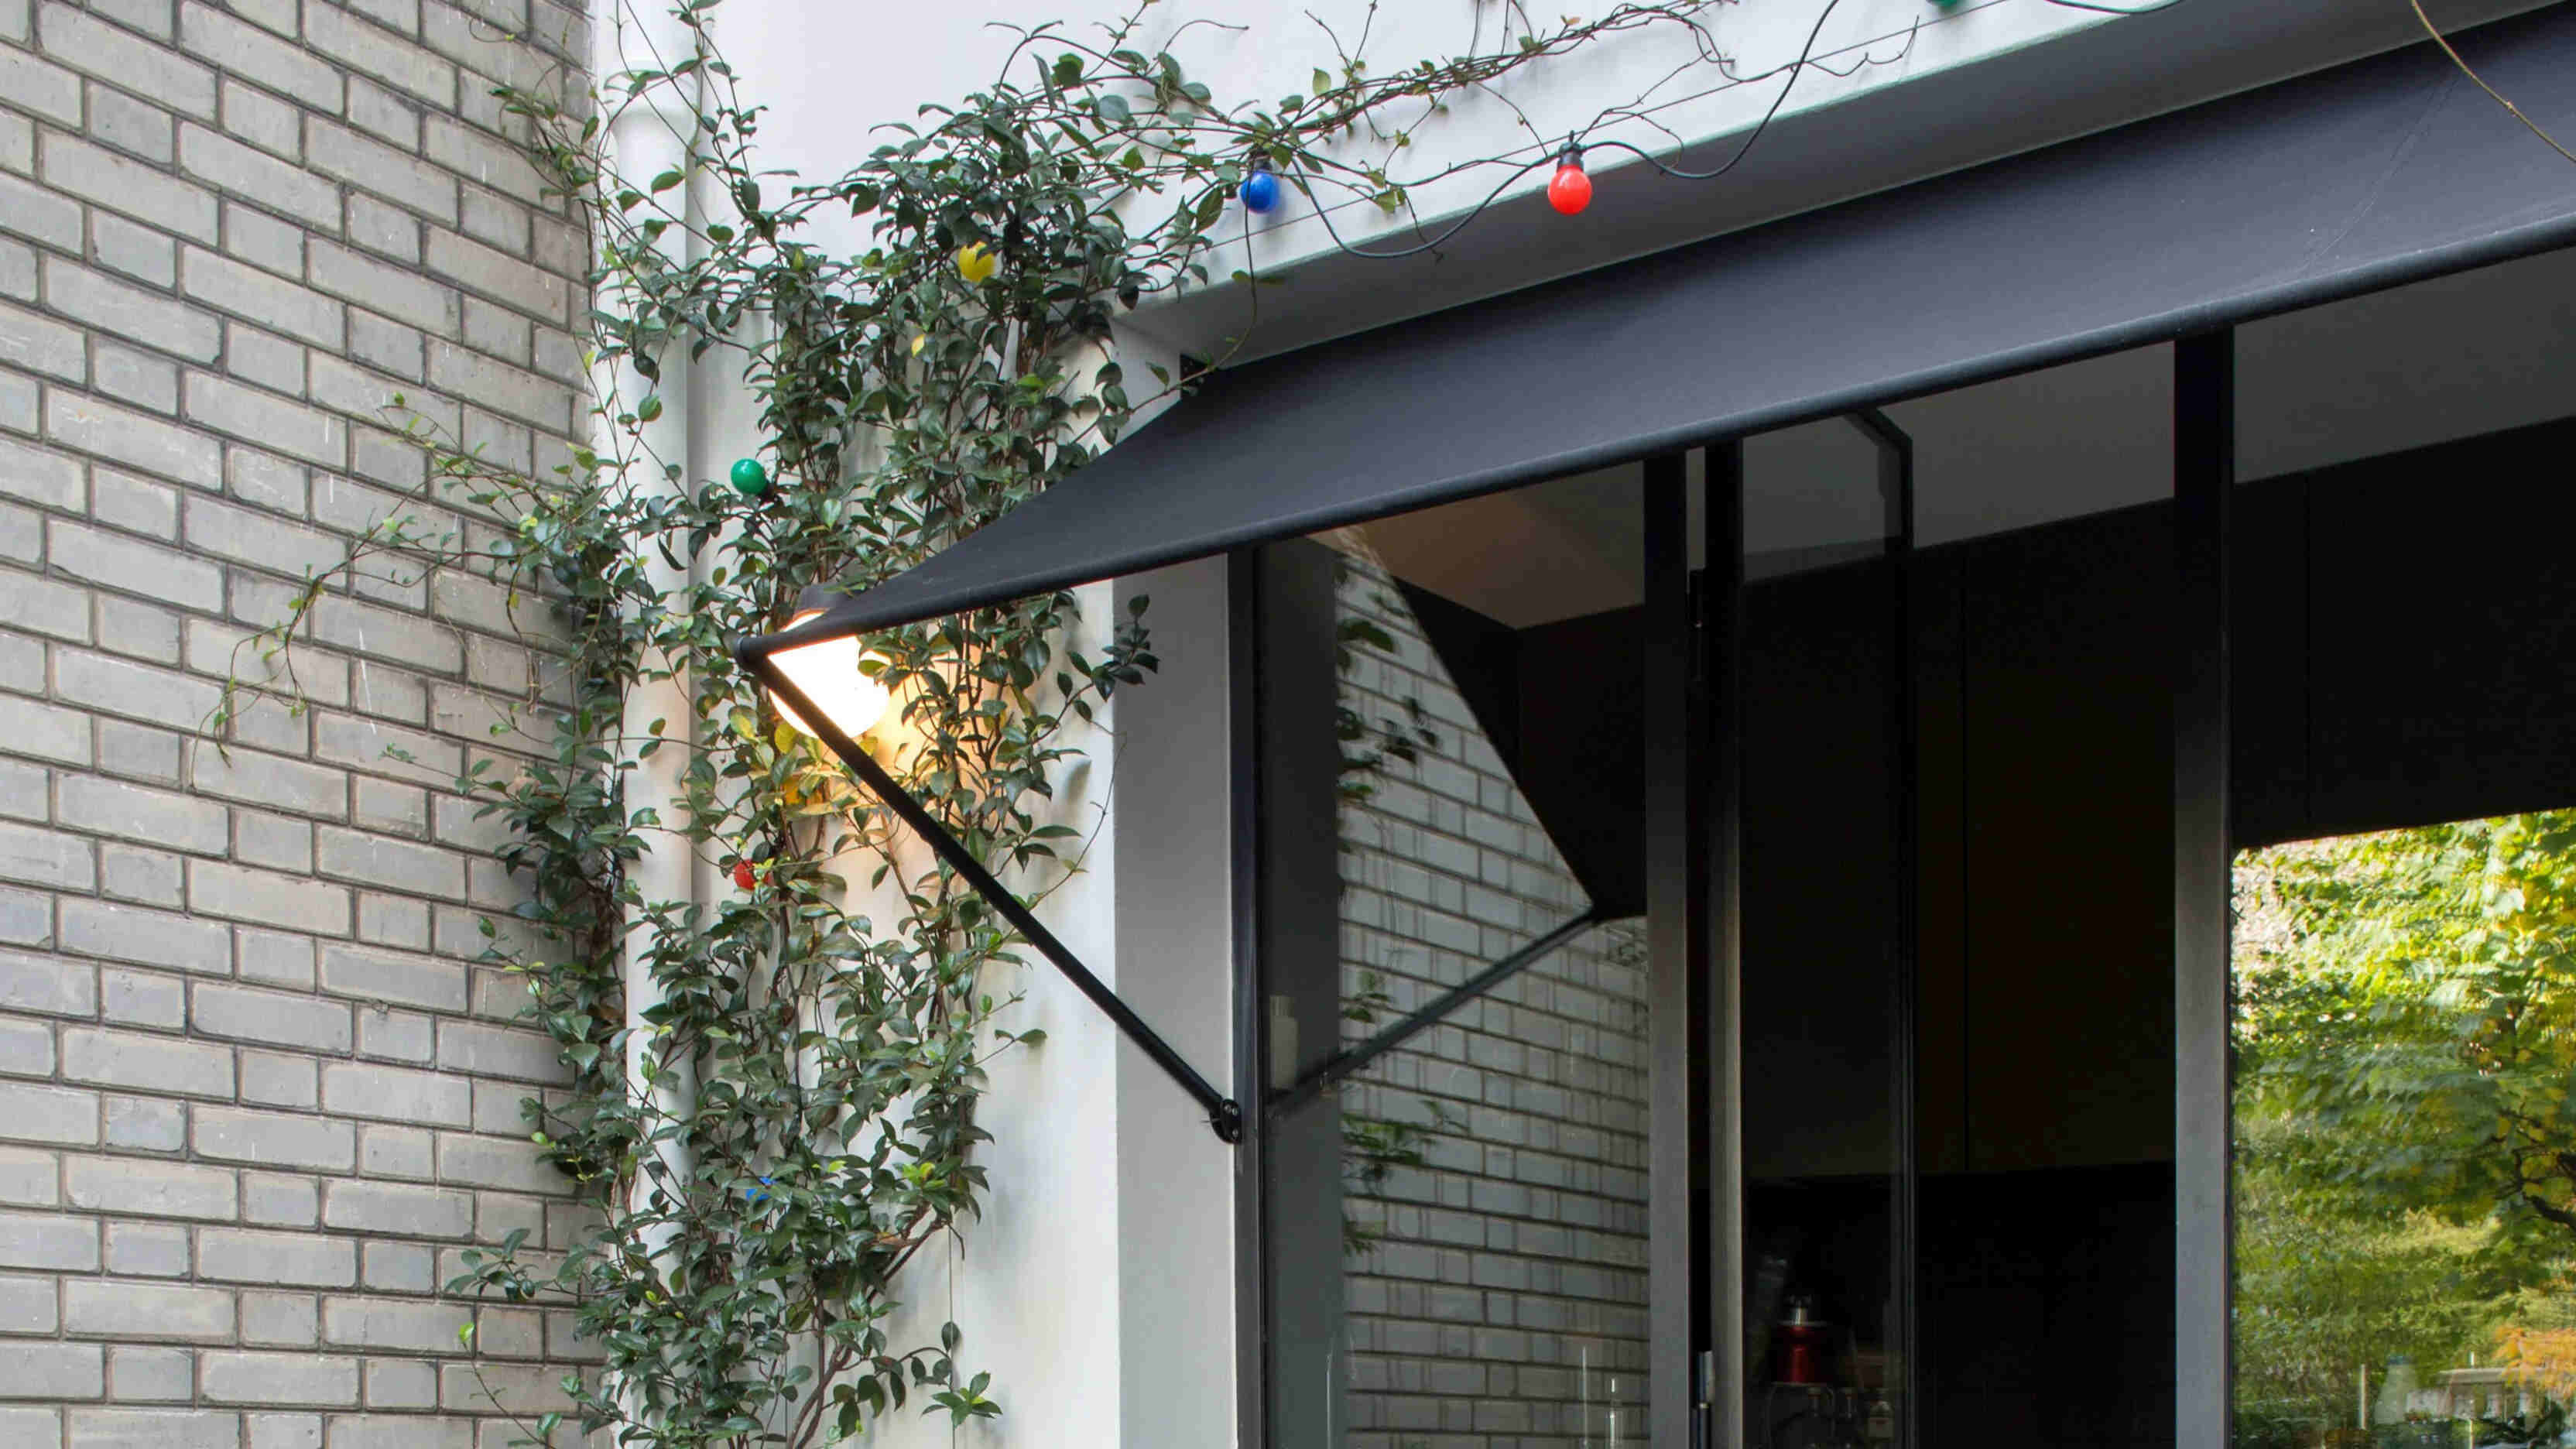 How To Build An Awning Over A Door